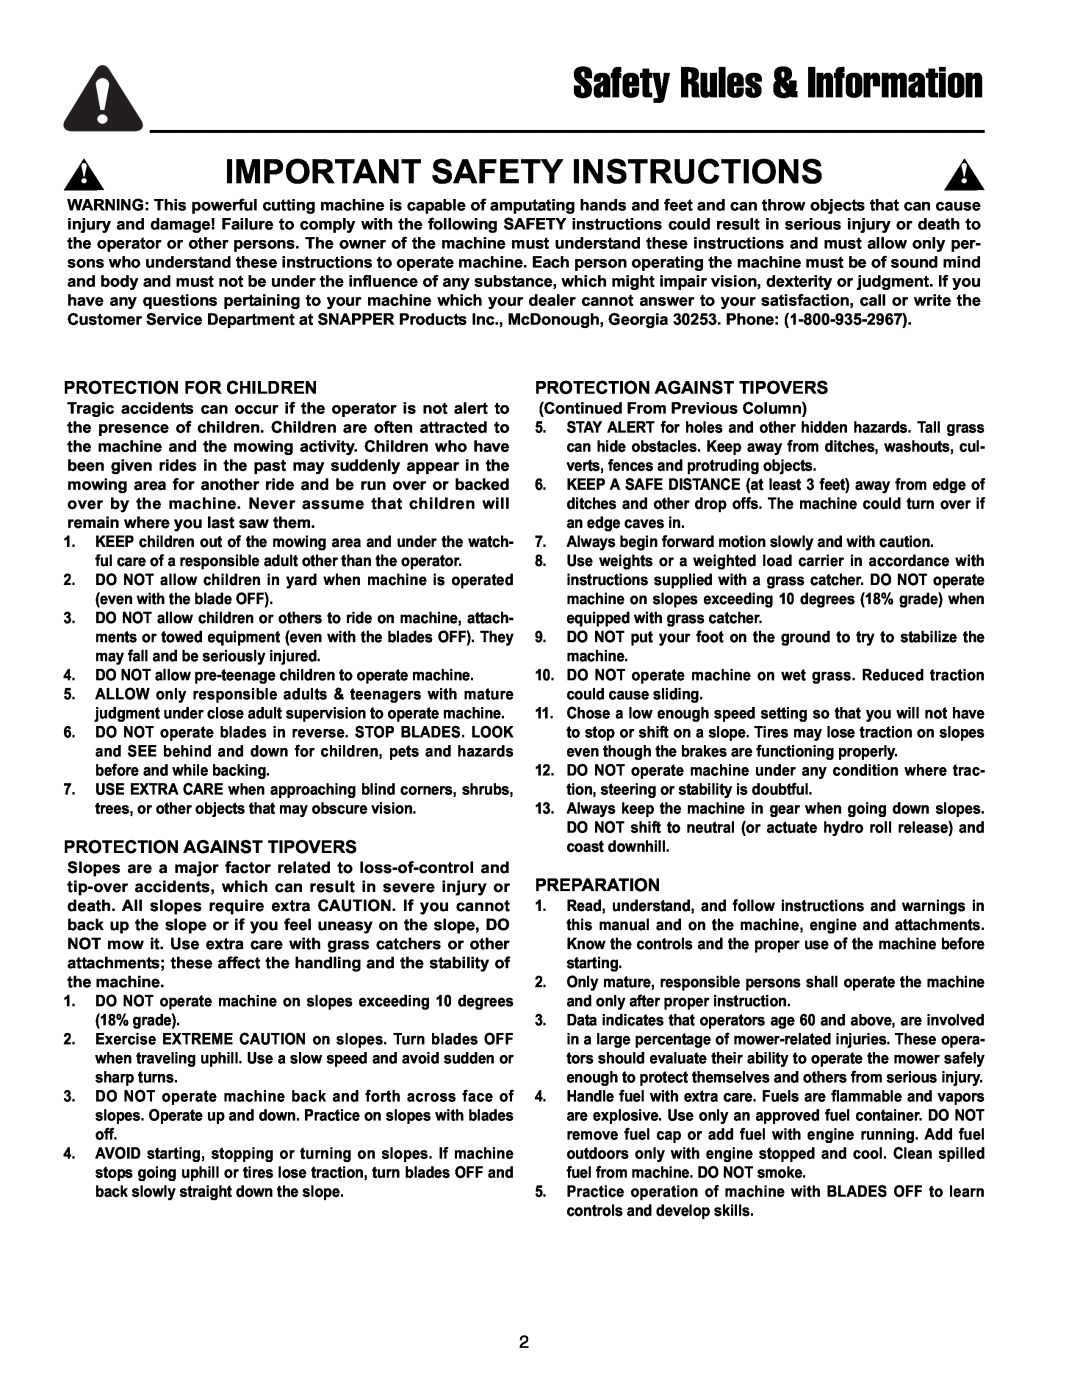 Simplicity 250 Z manual Safety Rules & Information, Important Safety Instructions, Protection For Children, Preparation 